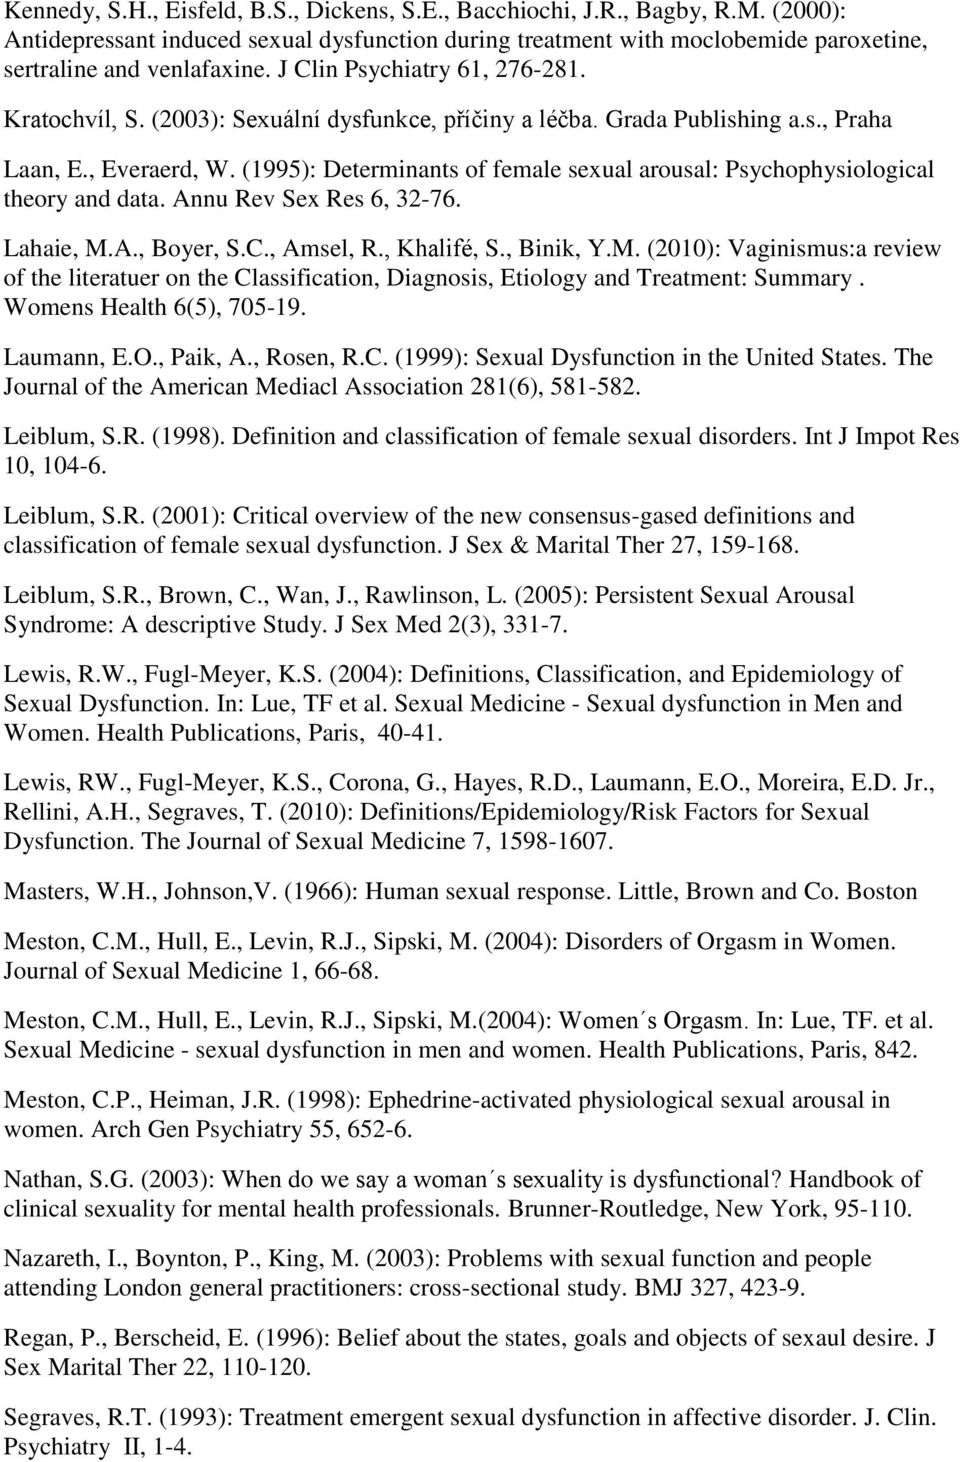 (1995): Determinants of female sexual arousal: Psychophysiological theory and data. Annu Rev Sex Res 6, 32-76. Lahaie, M.